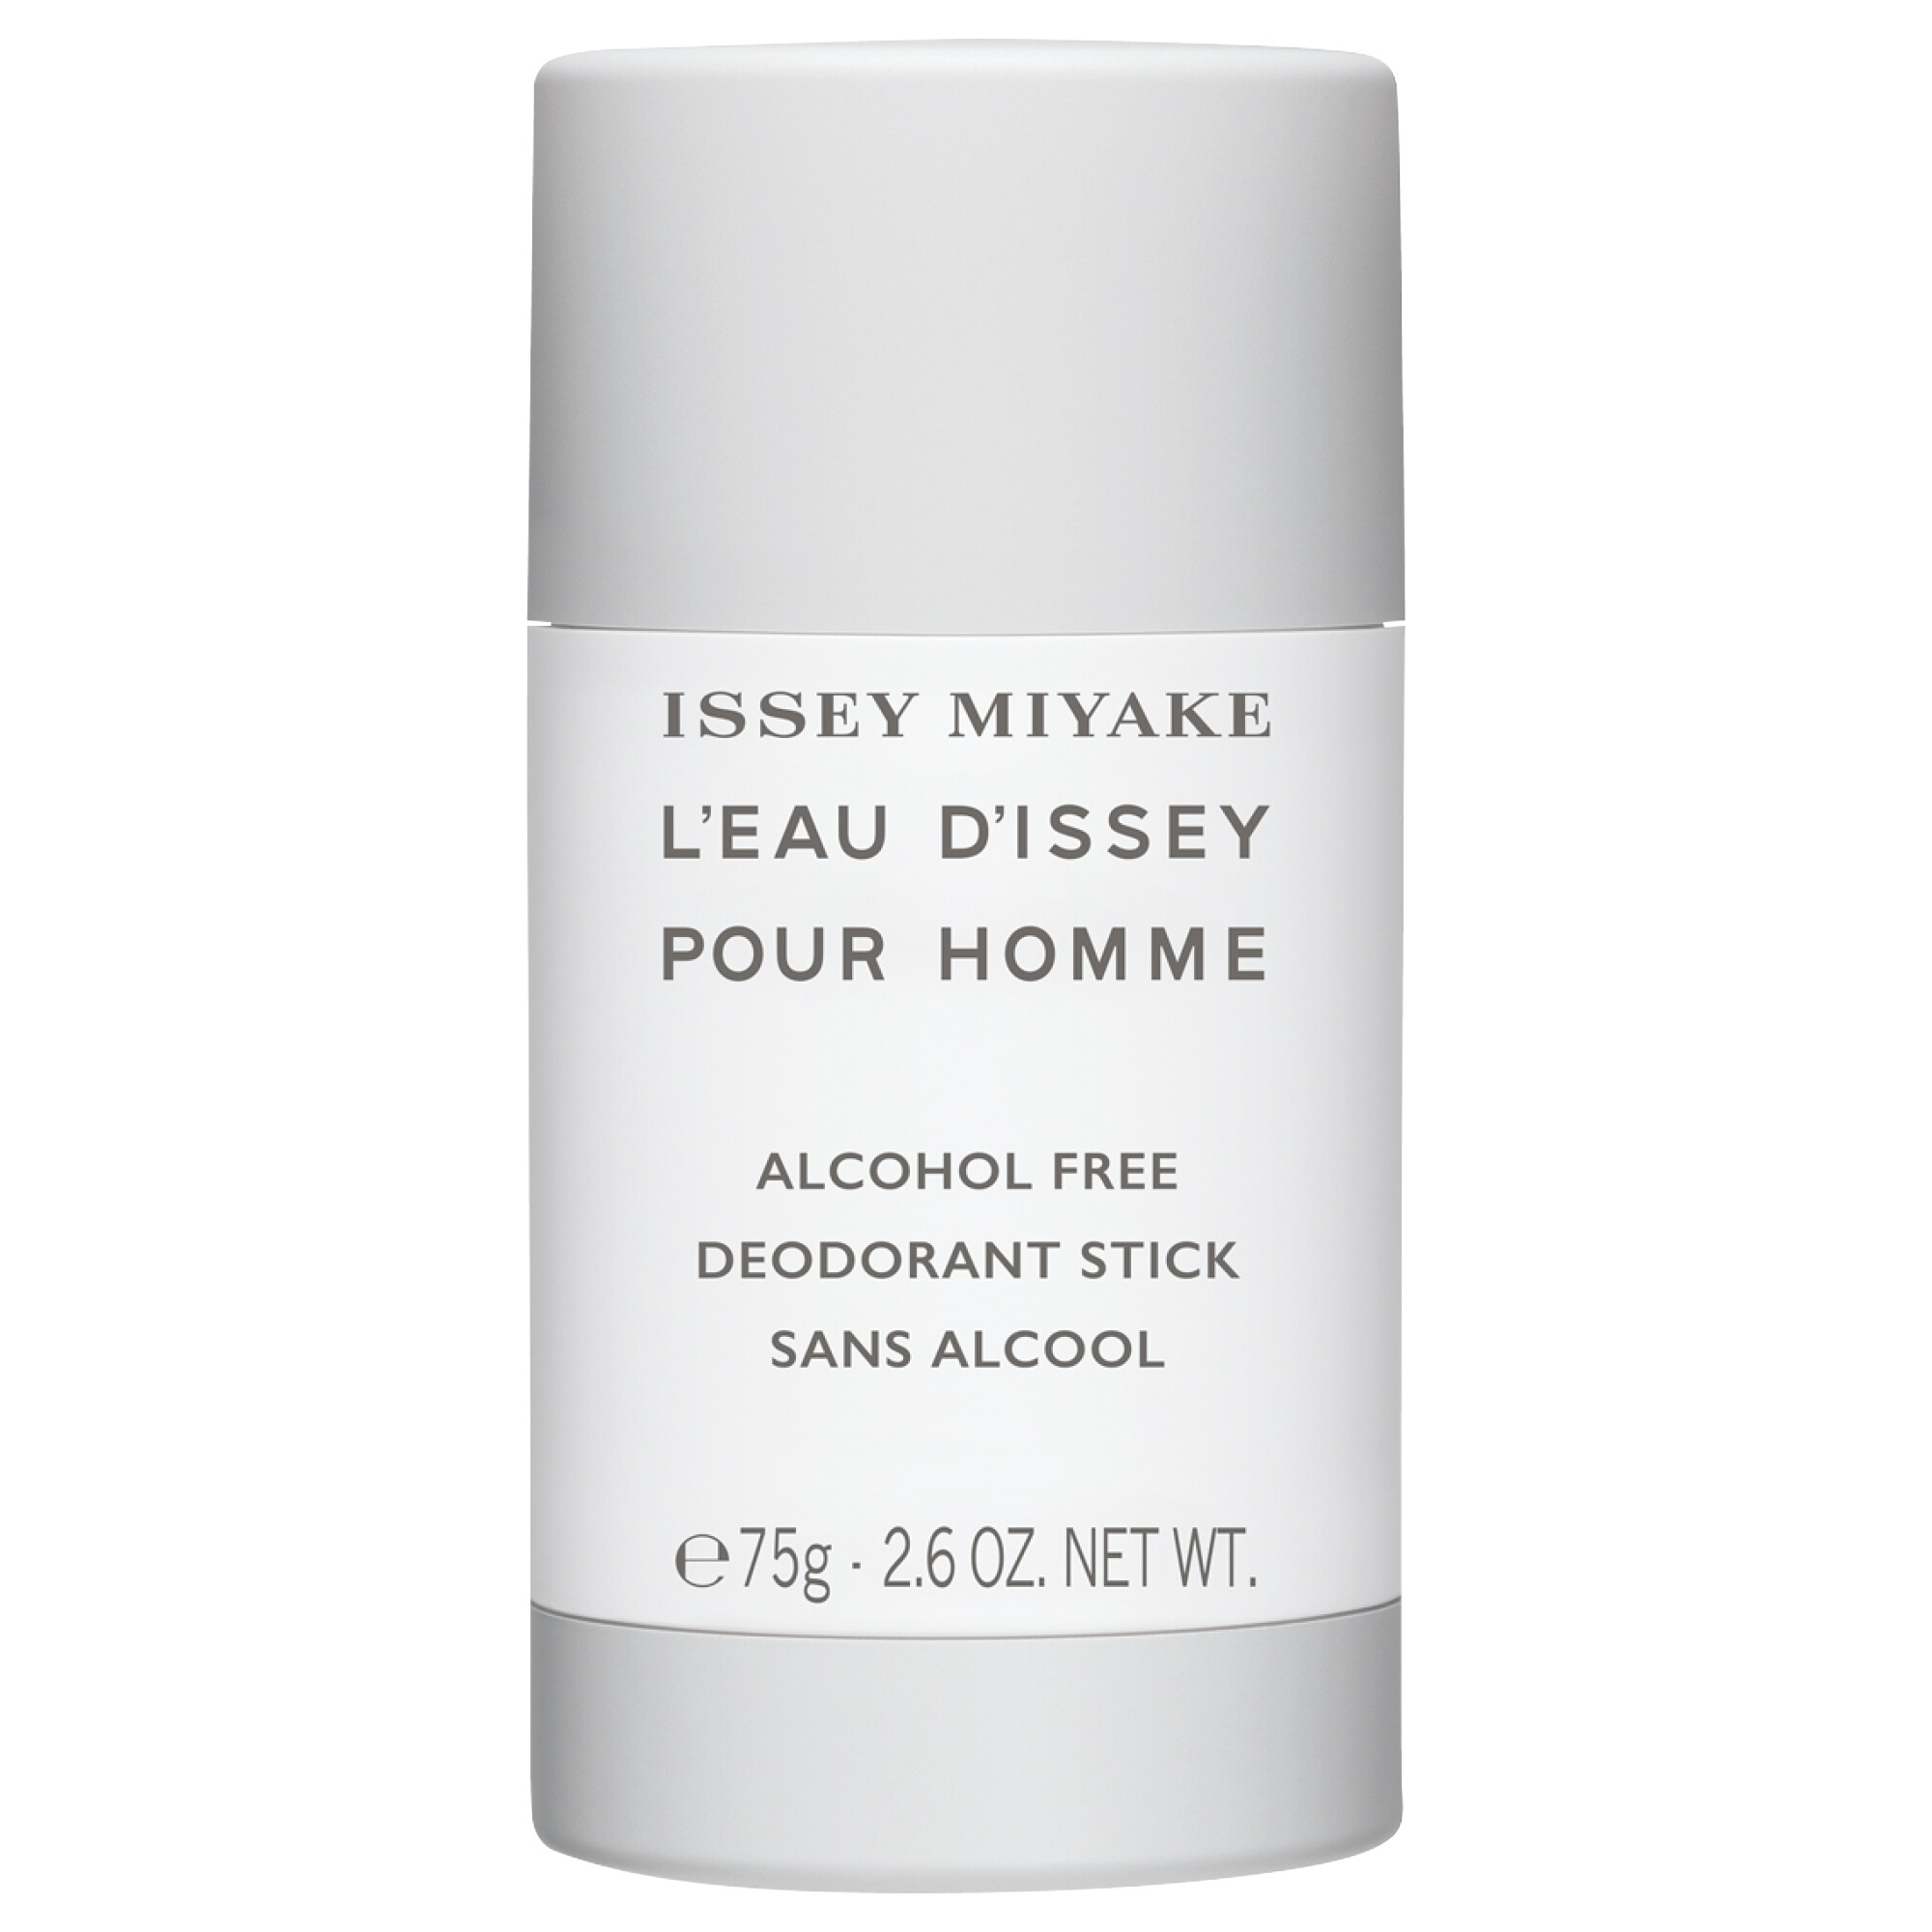 Deodorant Issey Miyake L'Eau d'Issey Pour Homme 75g kaufen